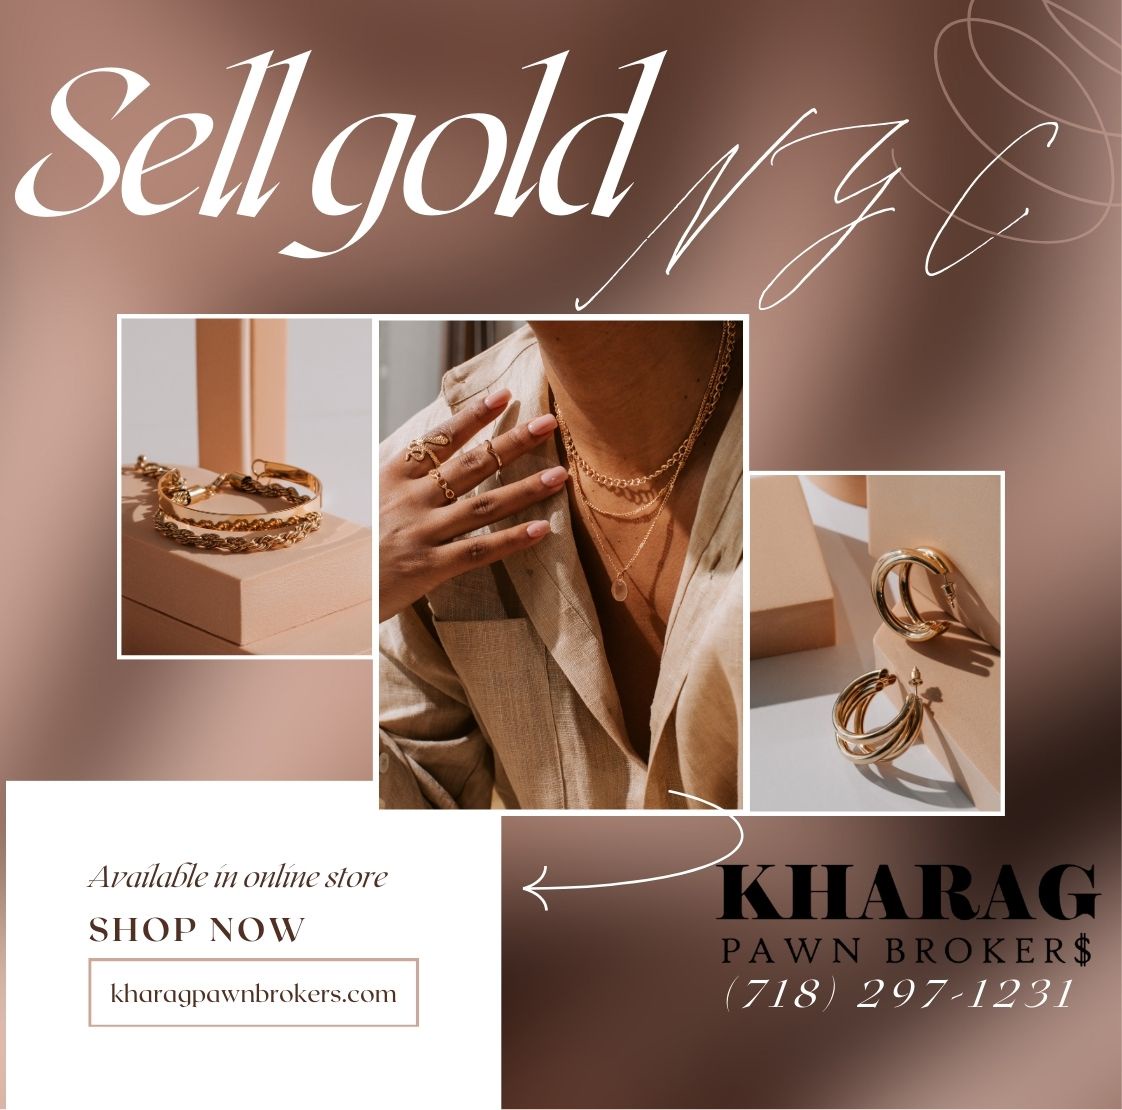 Do You Have Unused Gold? Turn it into Cash at Kharag Pawnbrokers NYC